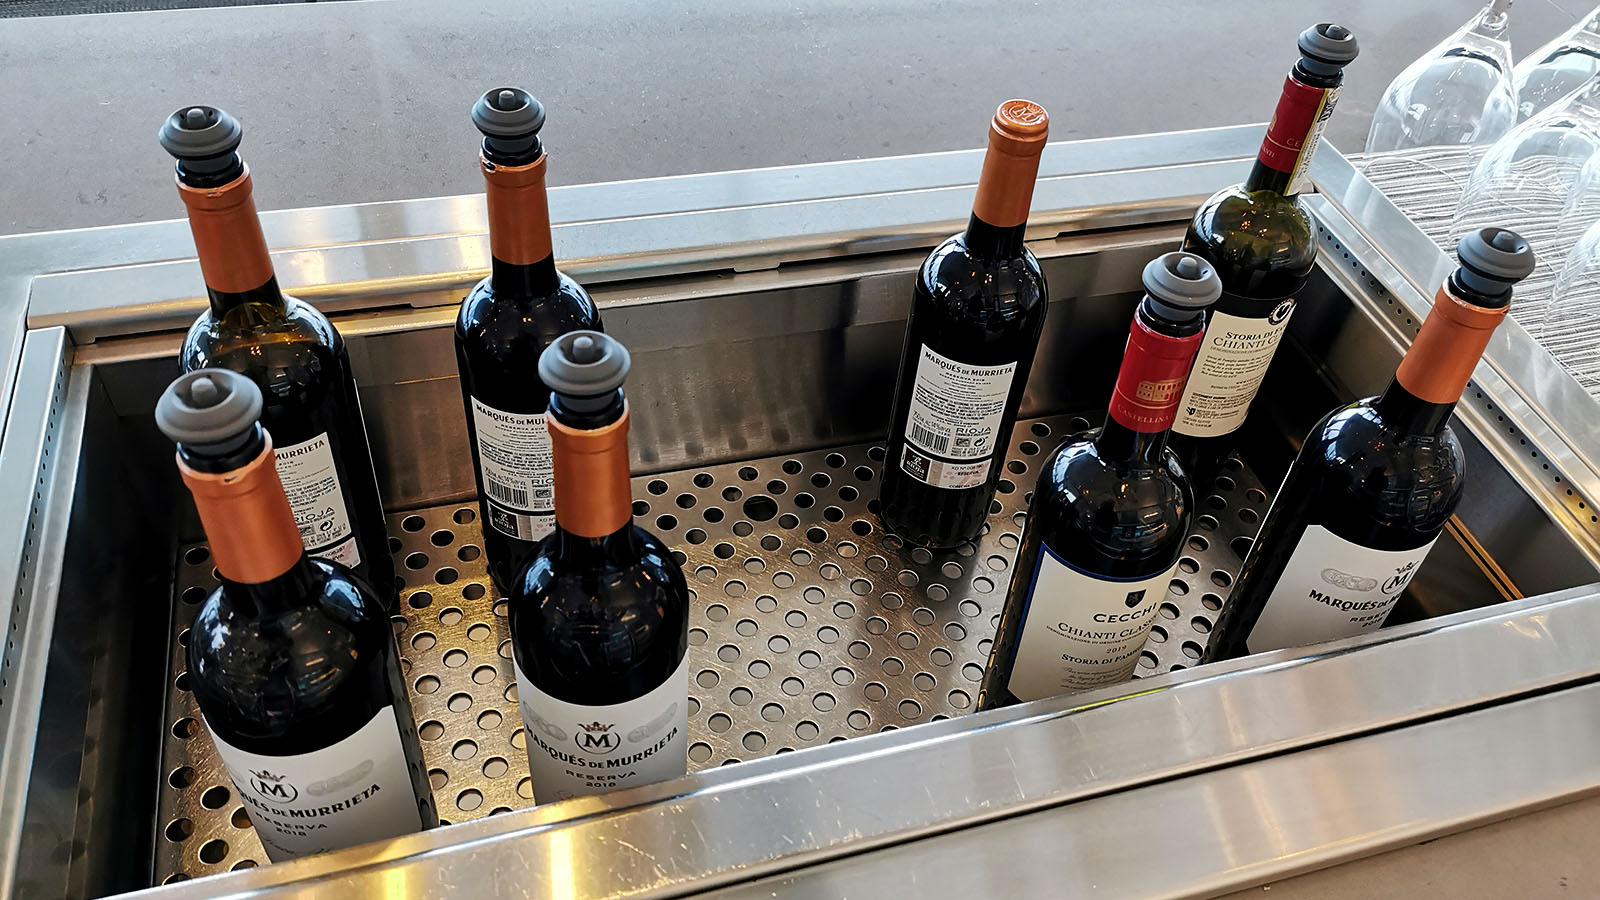 Wine bottles in the American Airlines Flagship Lounge, Los Angeles